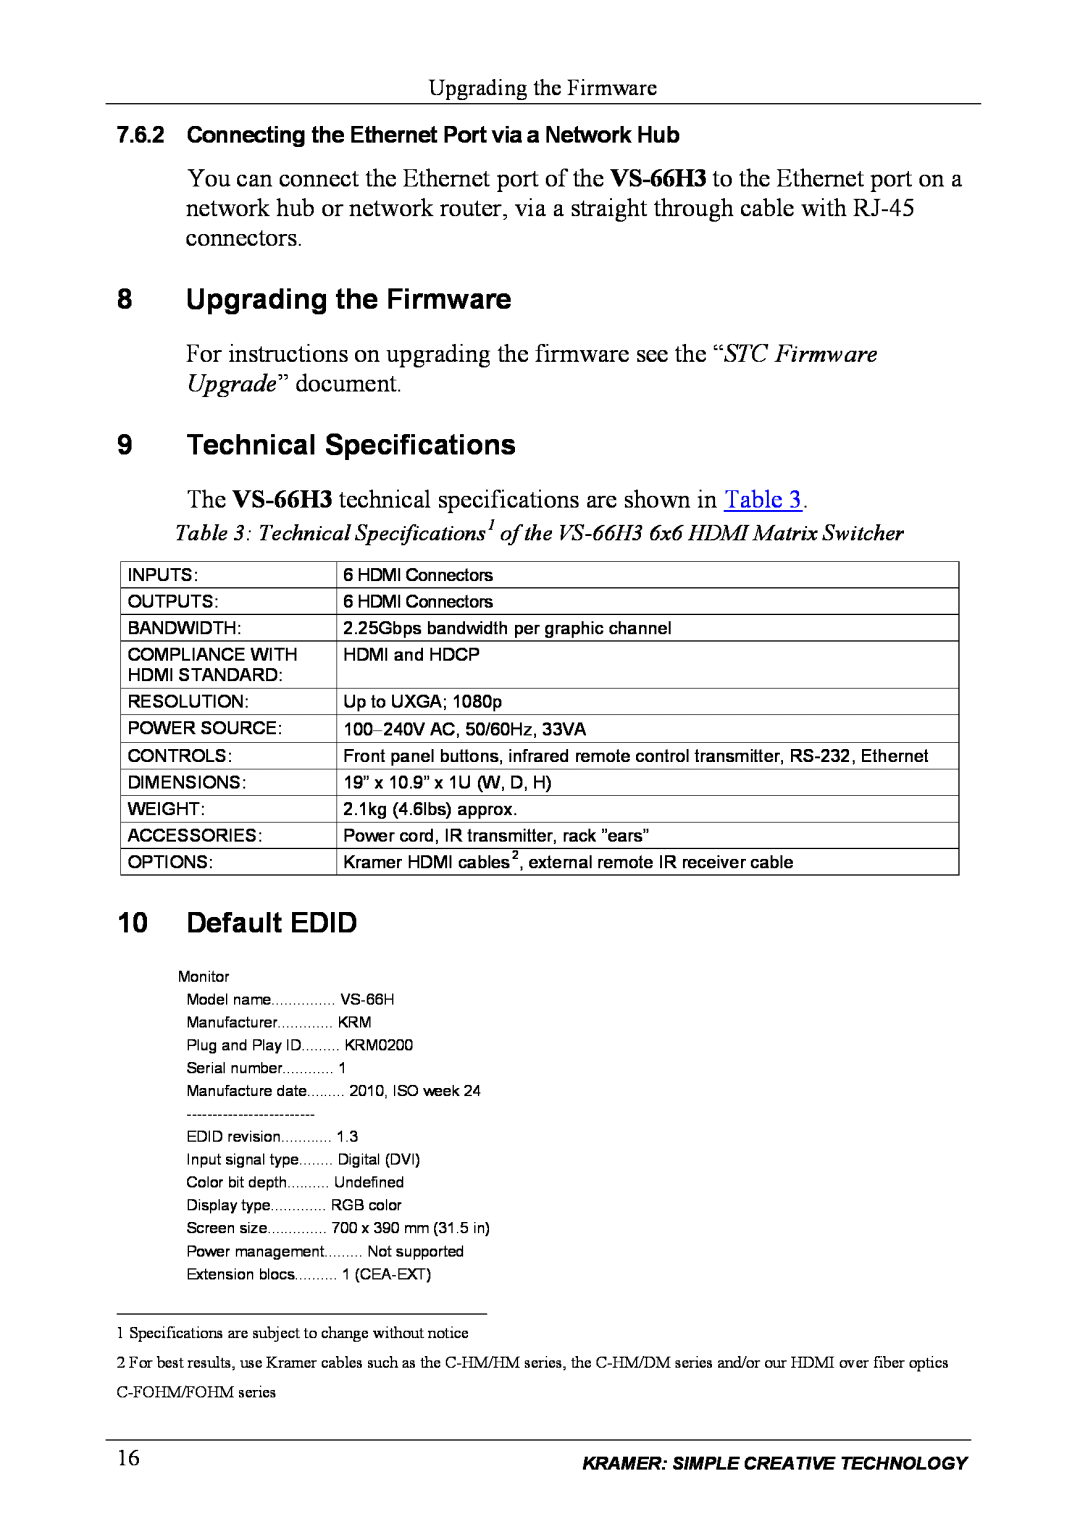 Kramer Electronics VS-66H3 user manual 8Upgrading the Firmware, 9Technical Specifications, Default EDID 